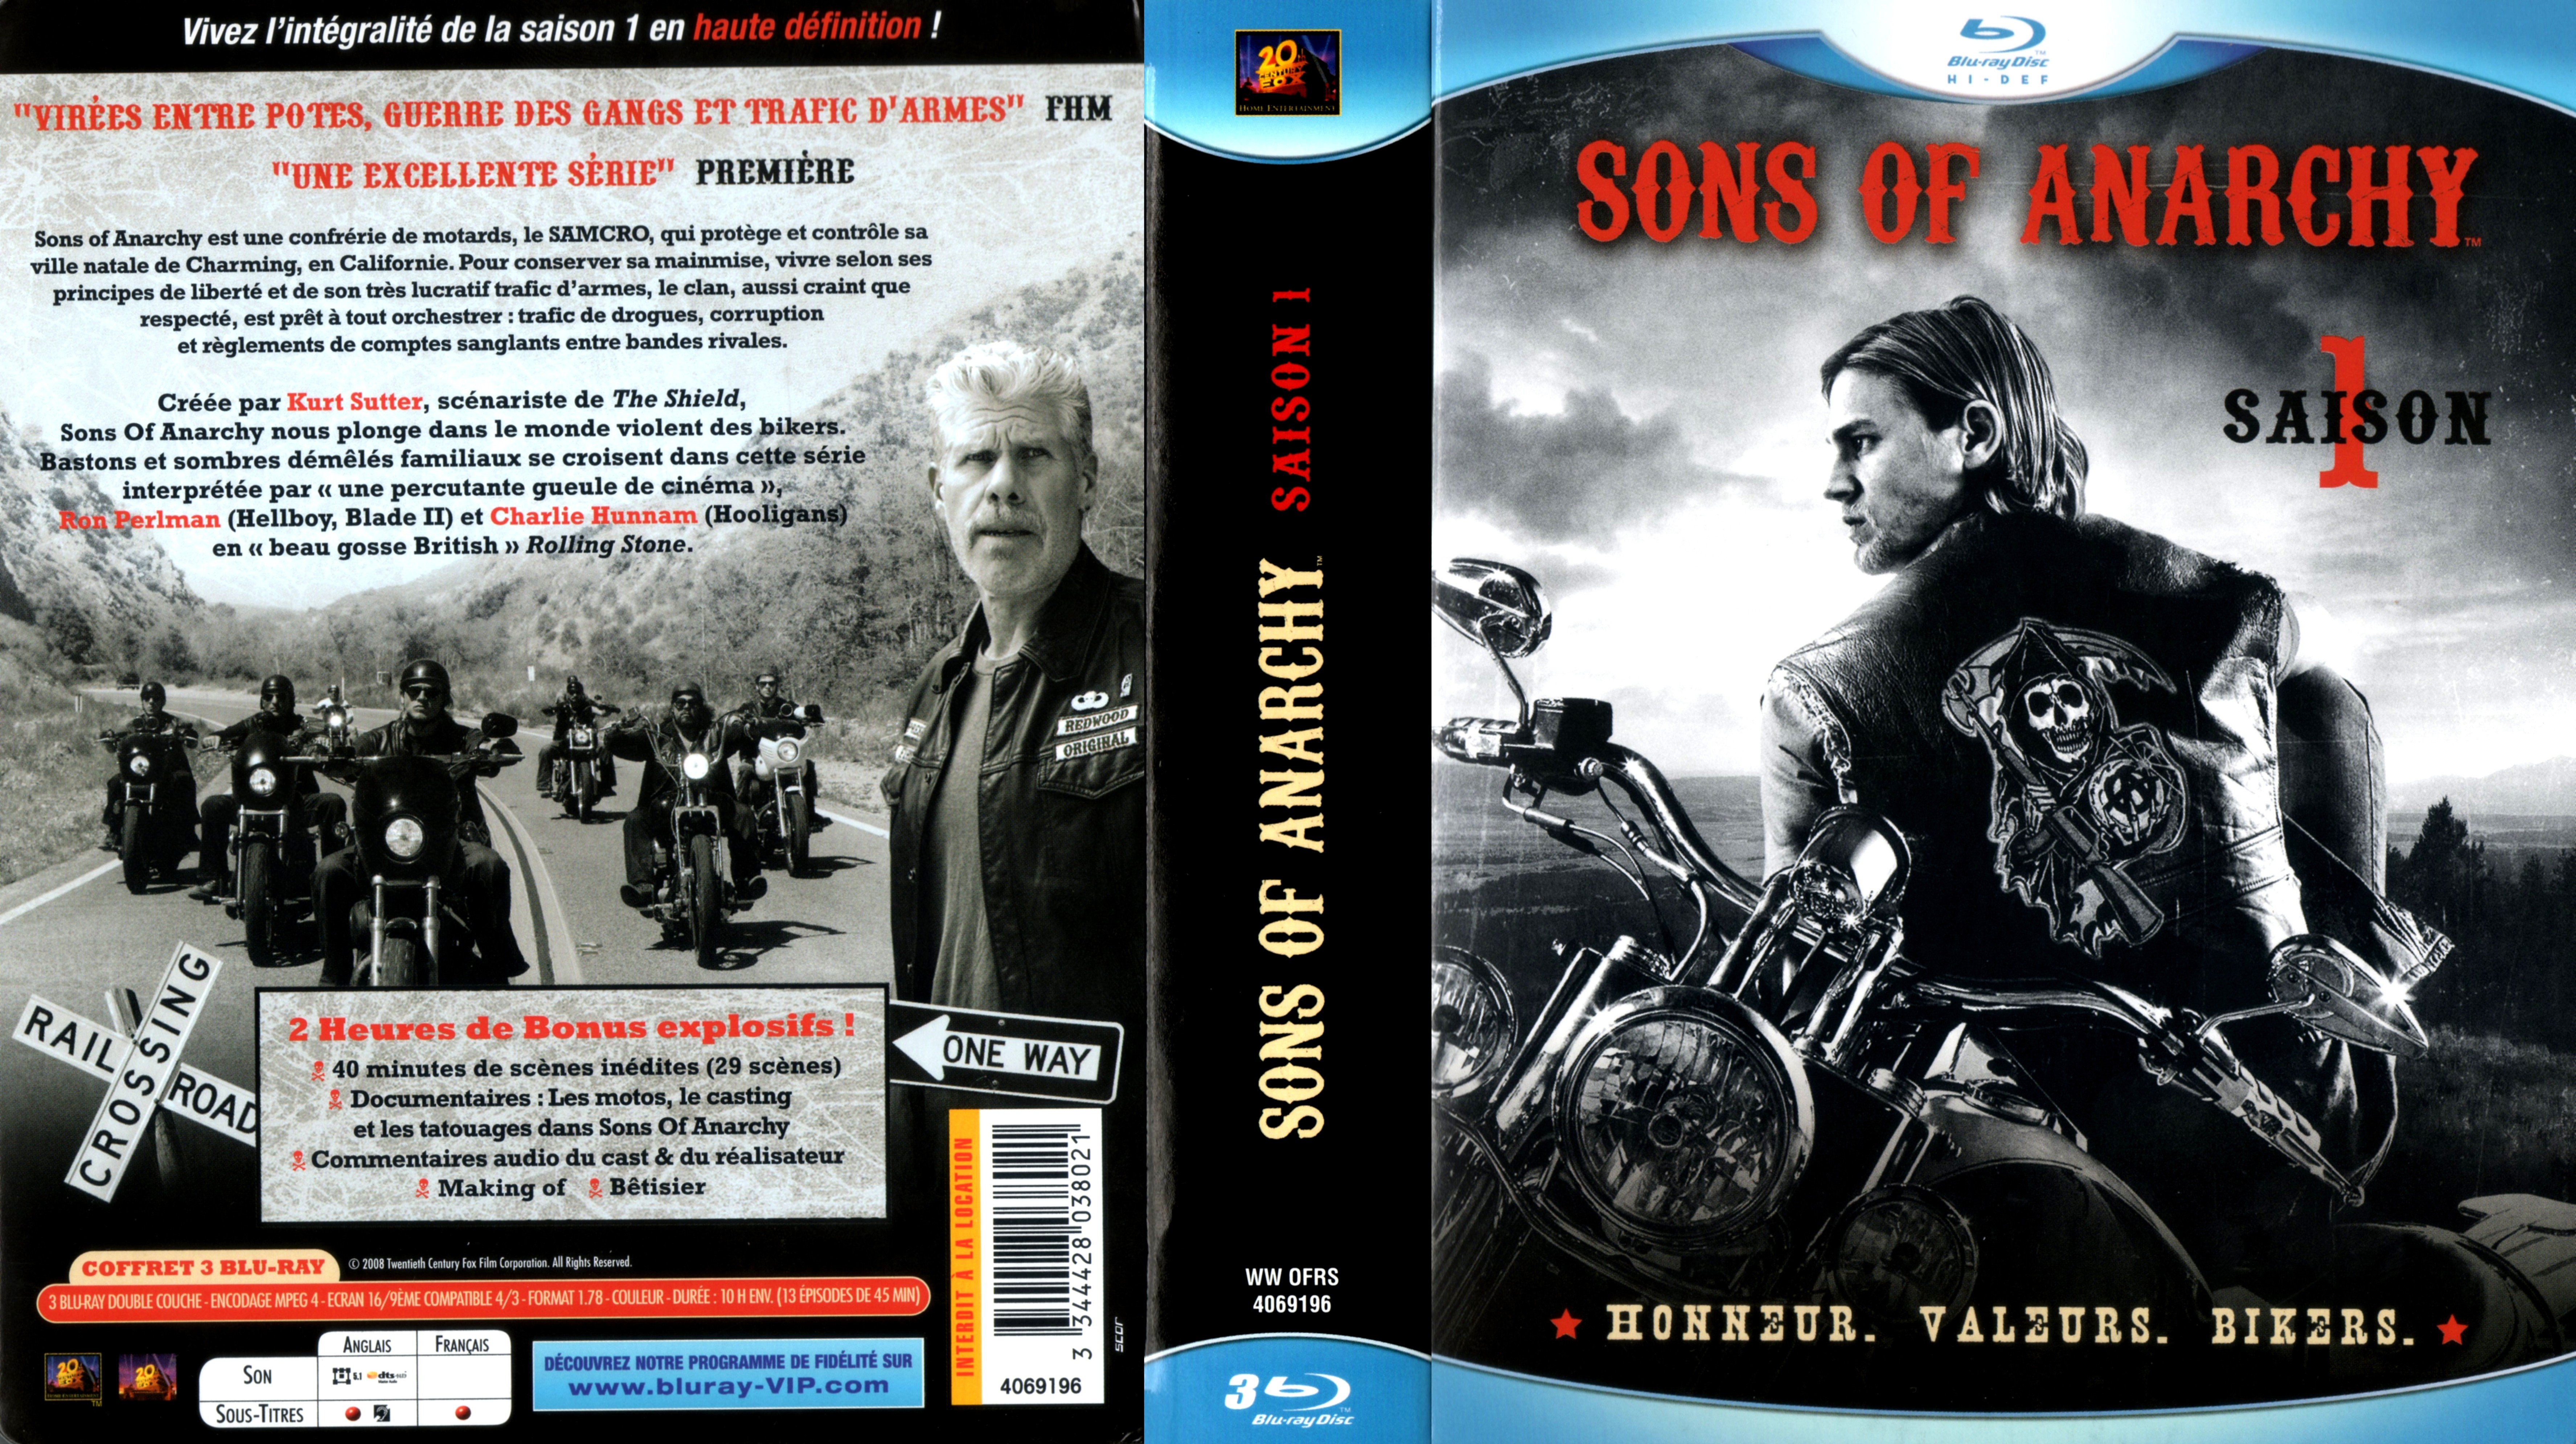 Jaquette DVD Sons of anarchy Saison 1 COFFRET (BLU-RAY)